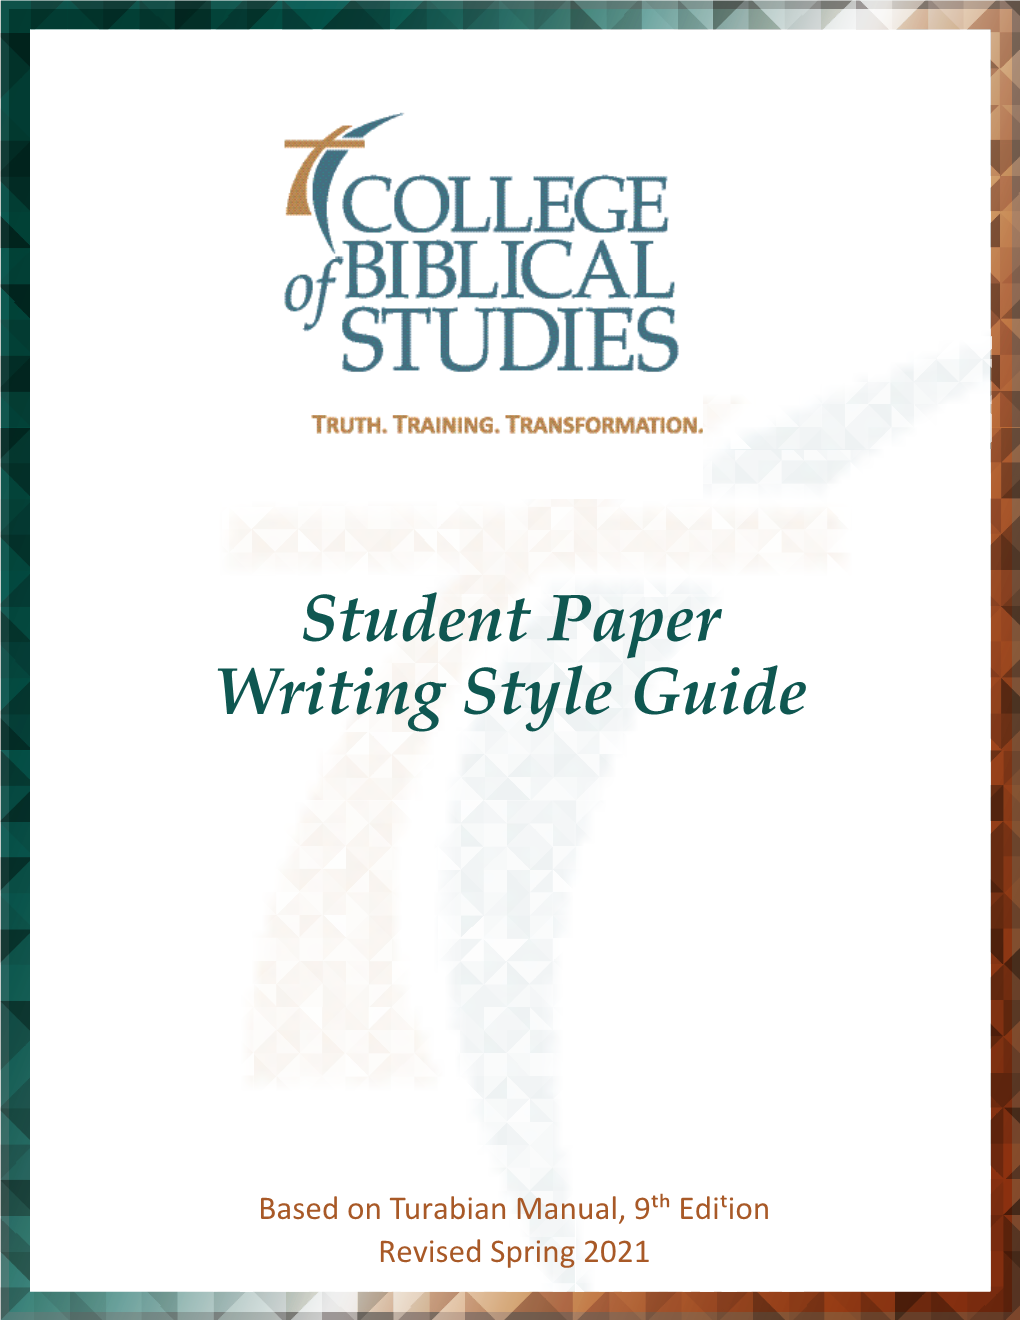 Student Paper Writing Style Guide